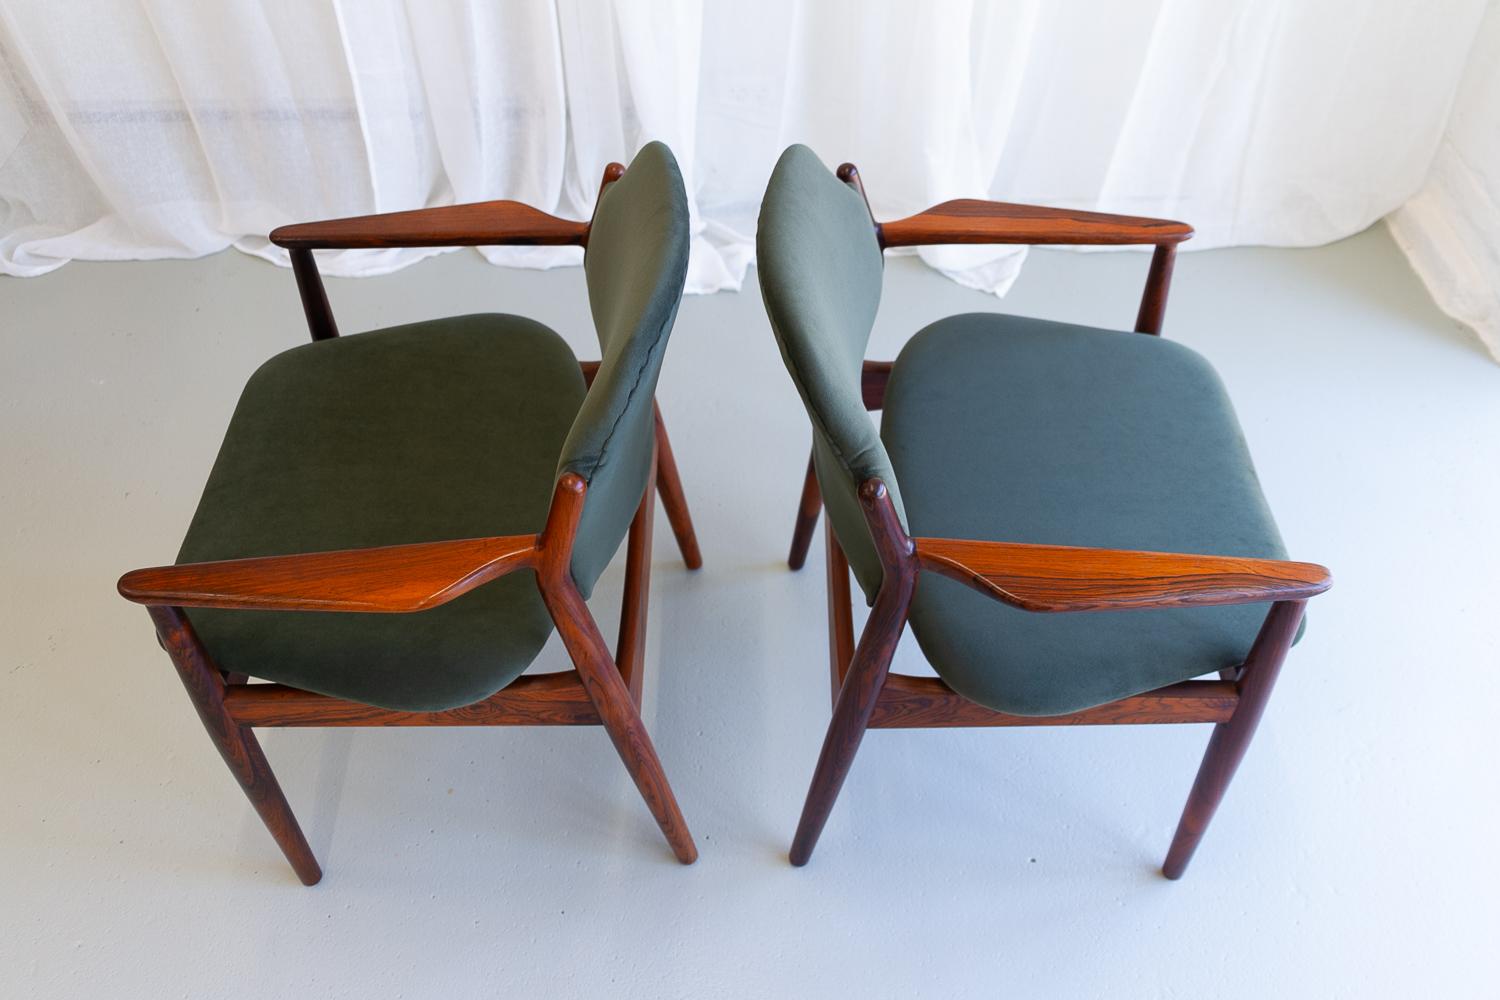 Danish Modern Rosewood Armchairs Model 62A by Arne Vodder, 1960s. Set of 2. For Sale 3